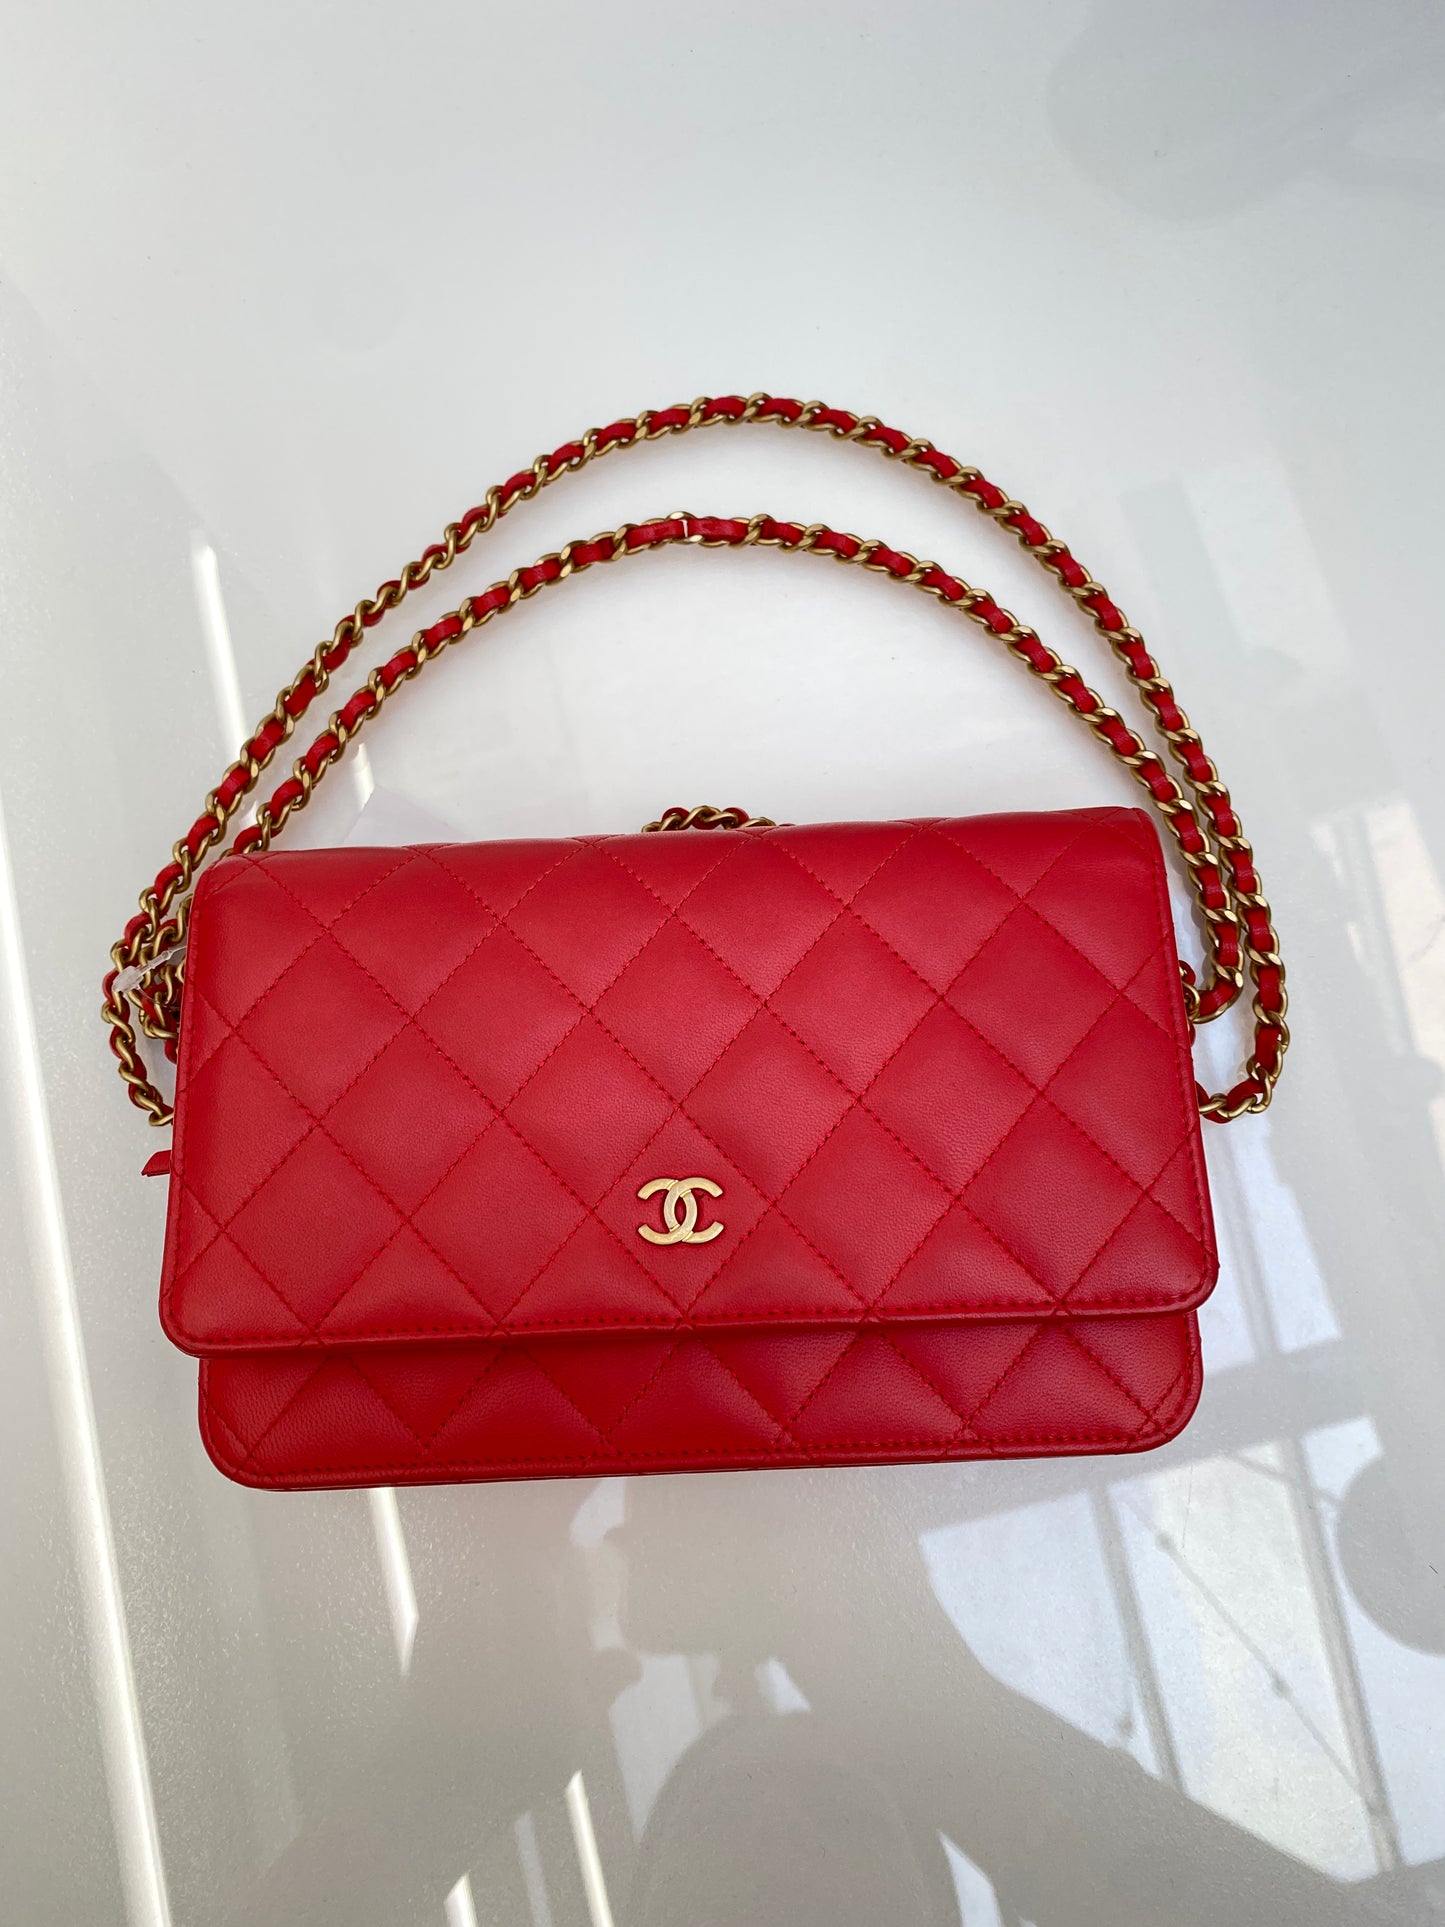 Chanel Red Quilted Lambskin Leather GHW Wallet on Chain